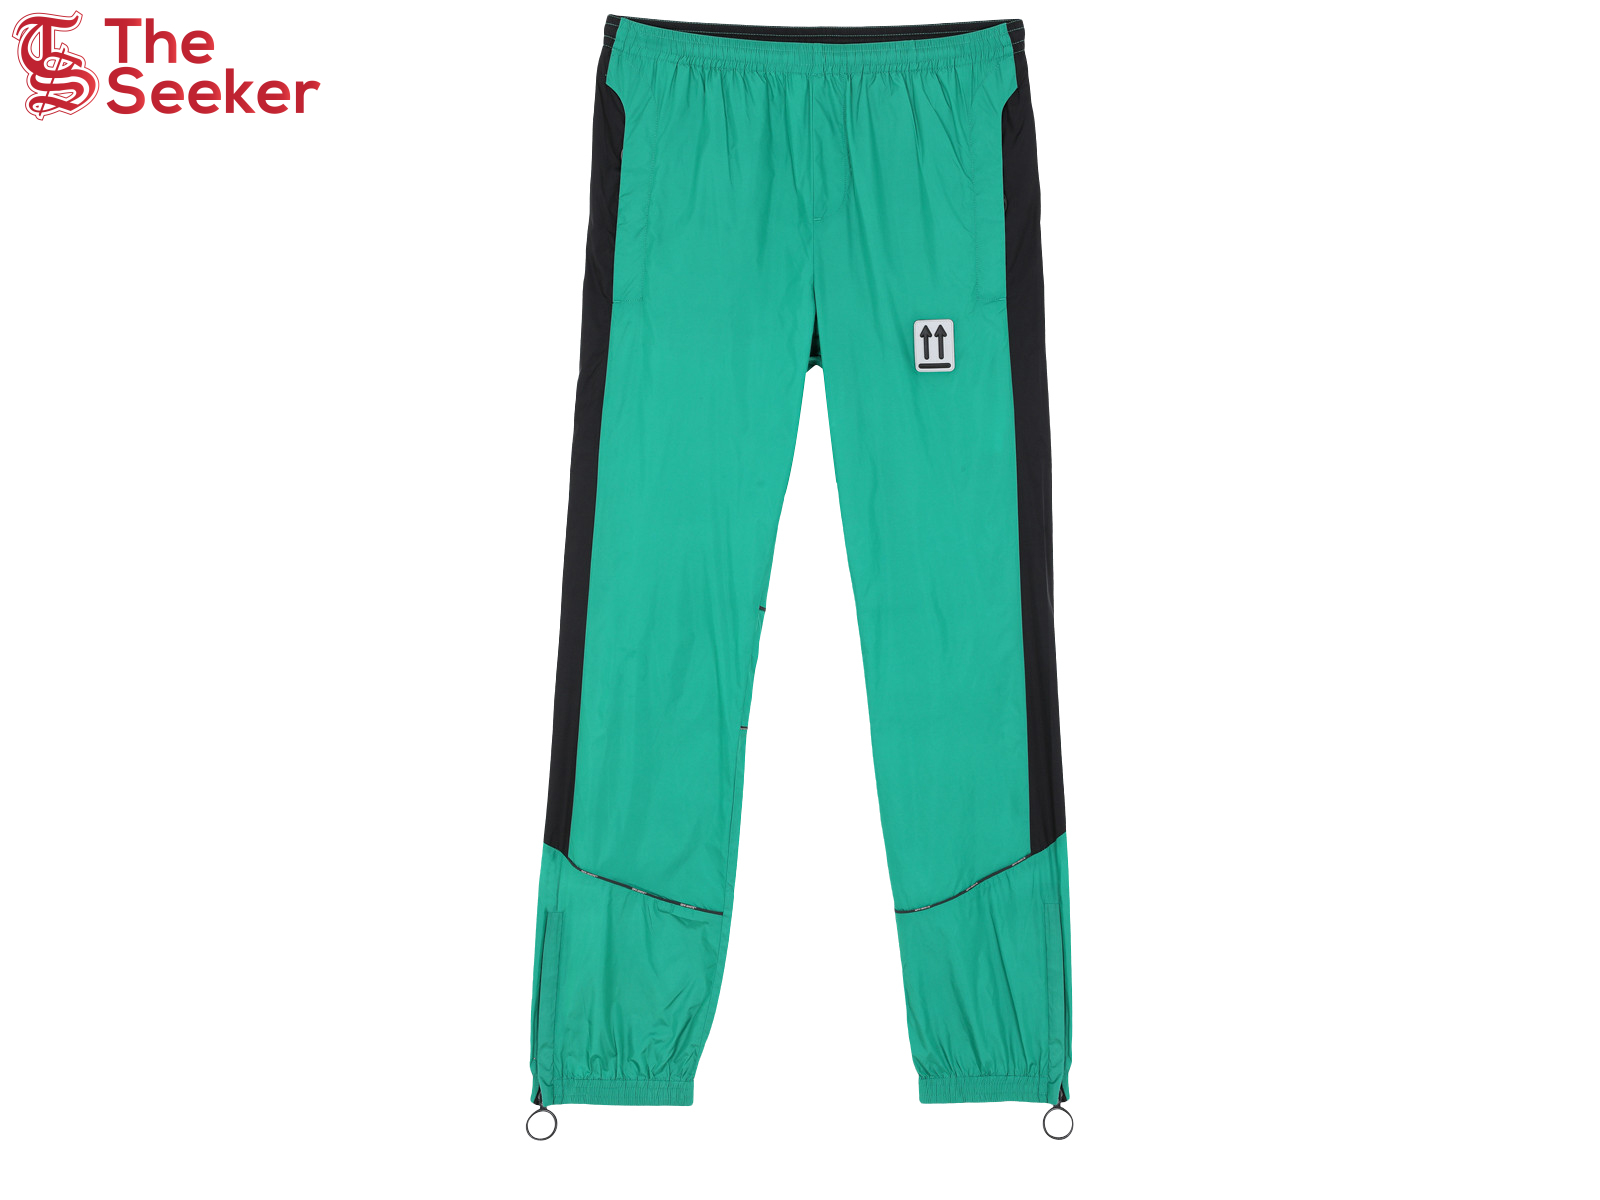 OFF-WHITE Track Pants Mint Green